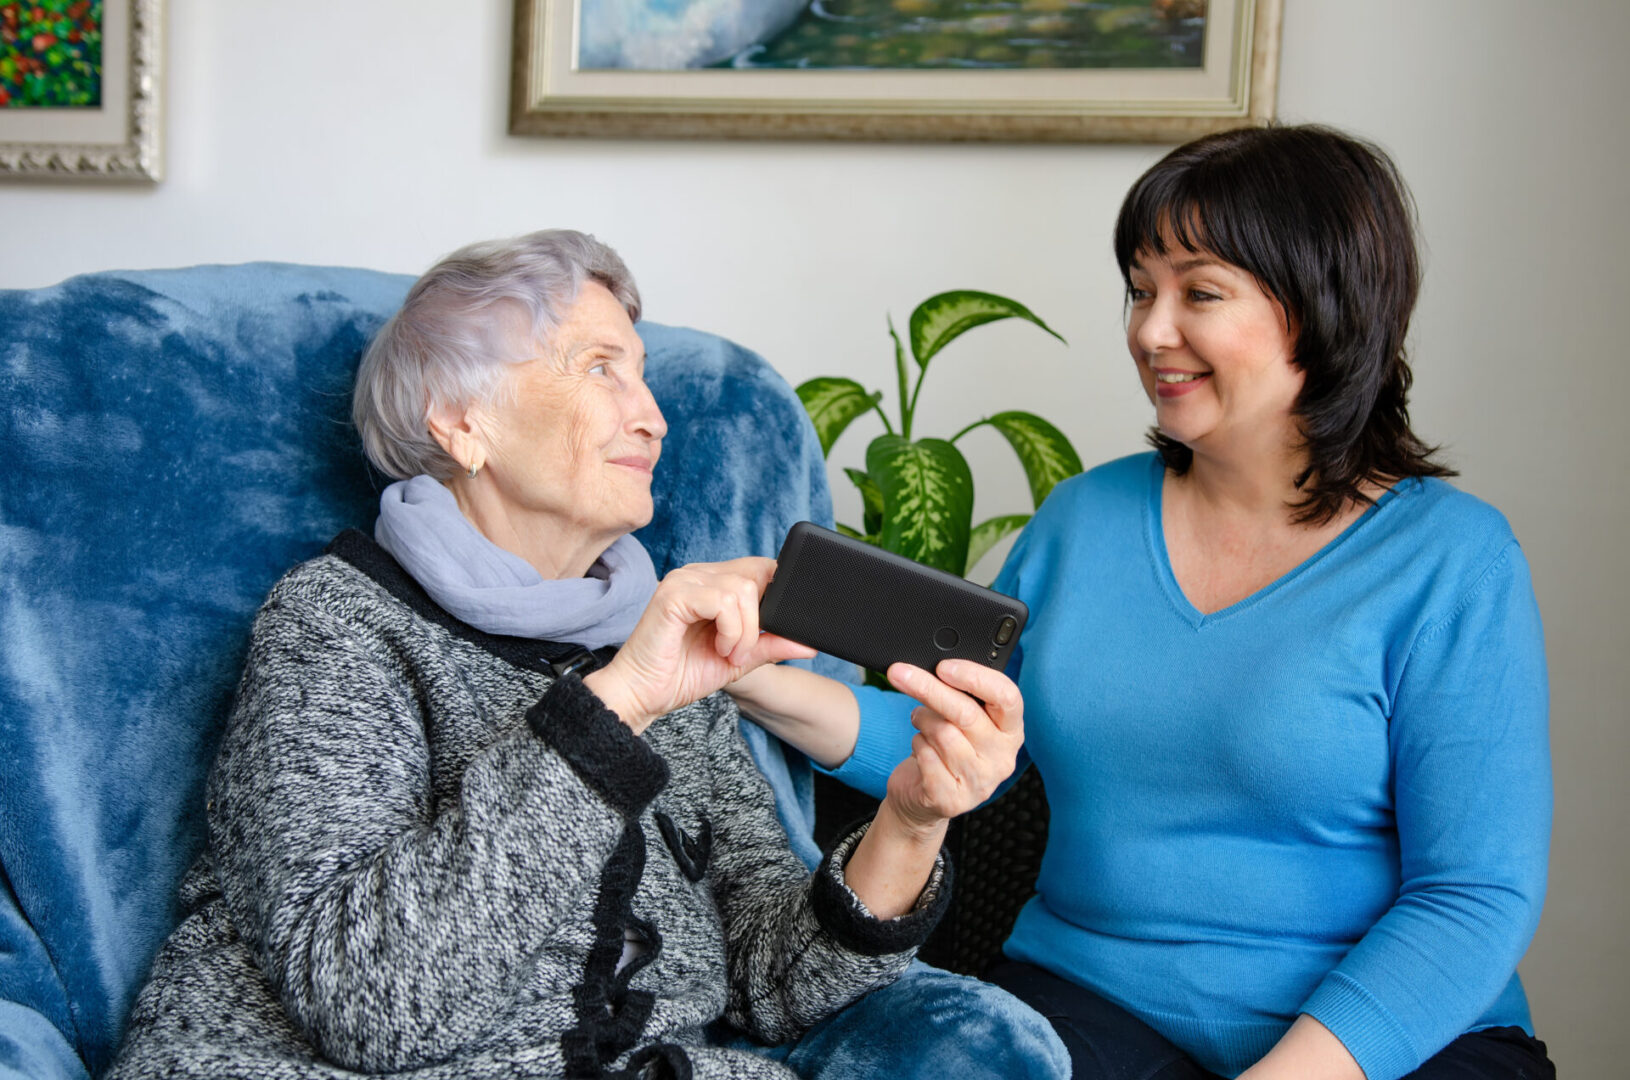 A woman showing an older lady something on her phone.